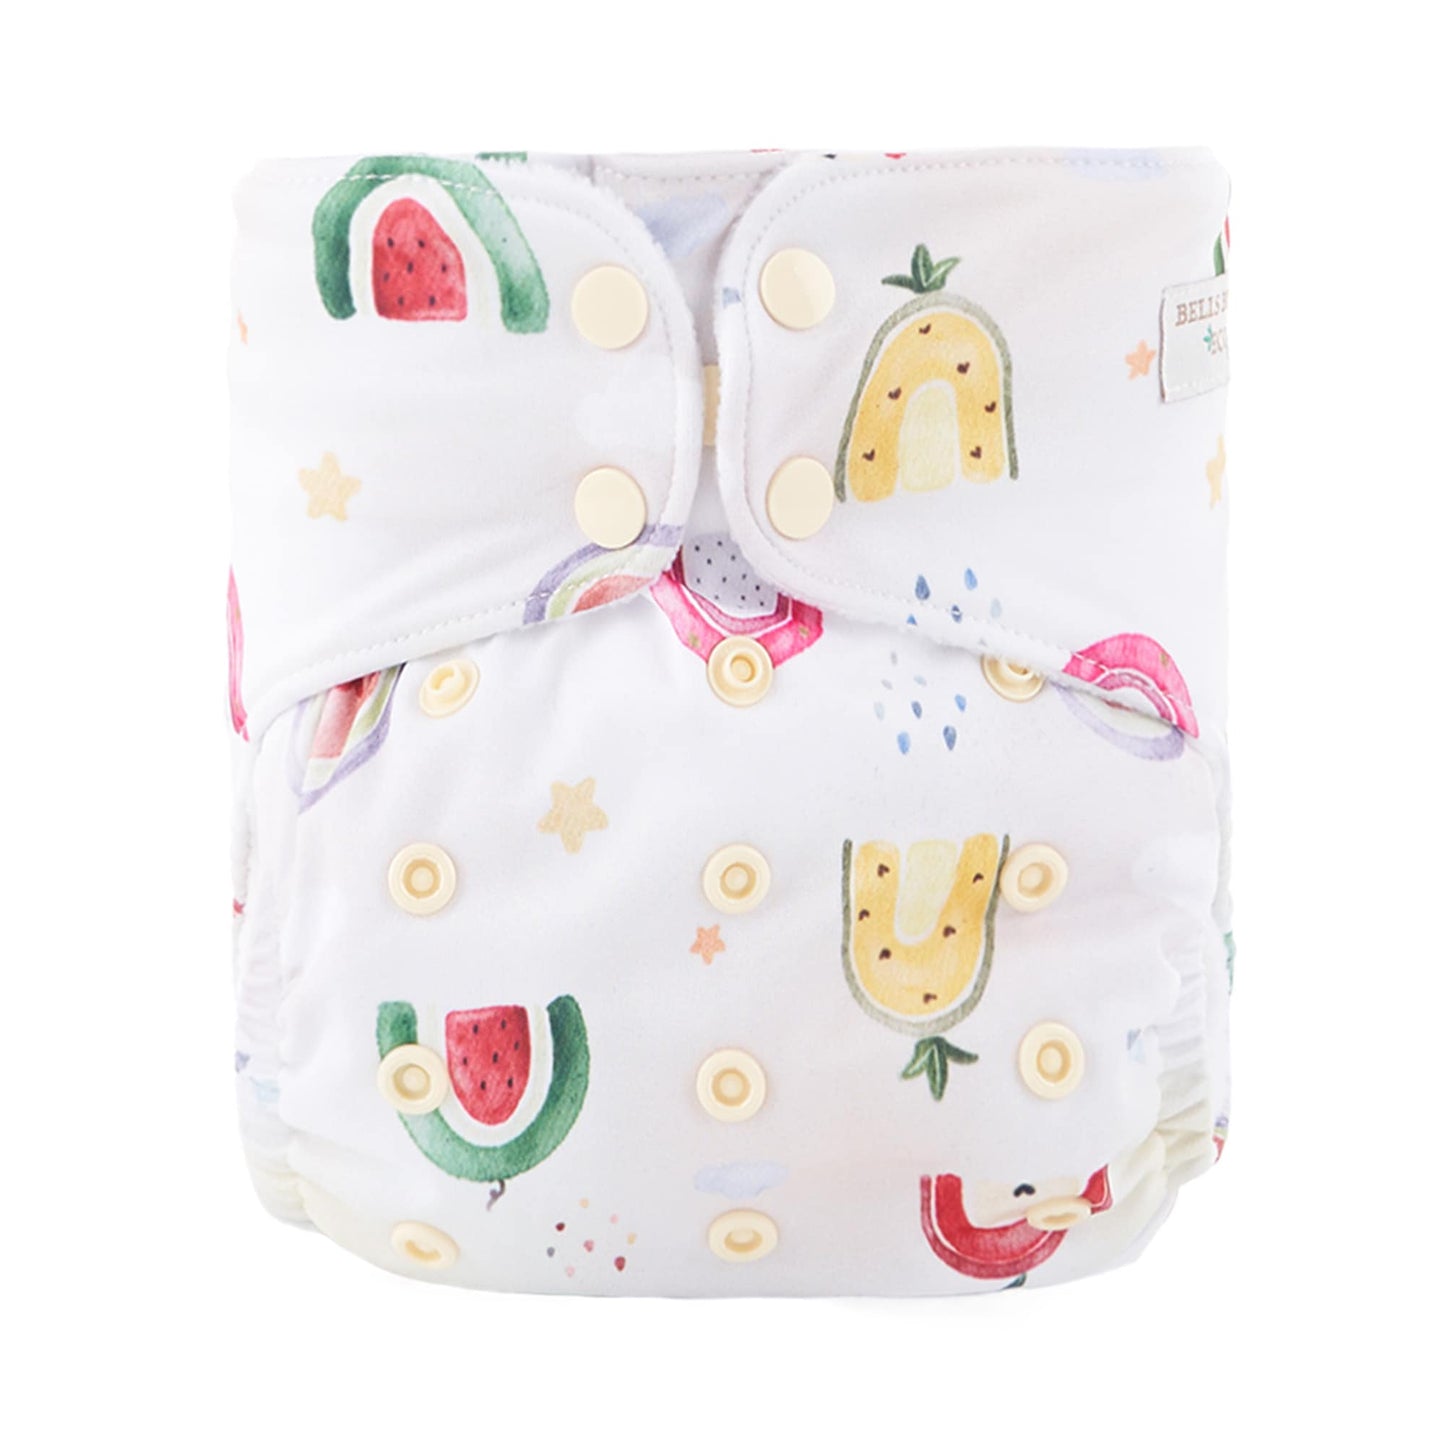 Image of a Bells Bumz Reusable Pocket Nappy Shell in Squeeze the day print